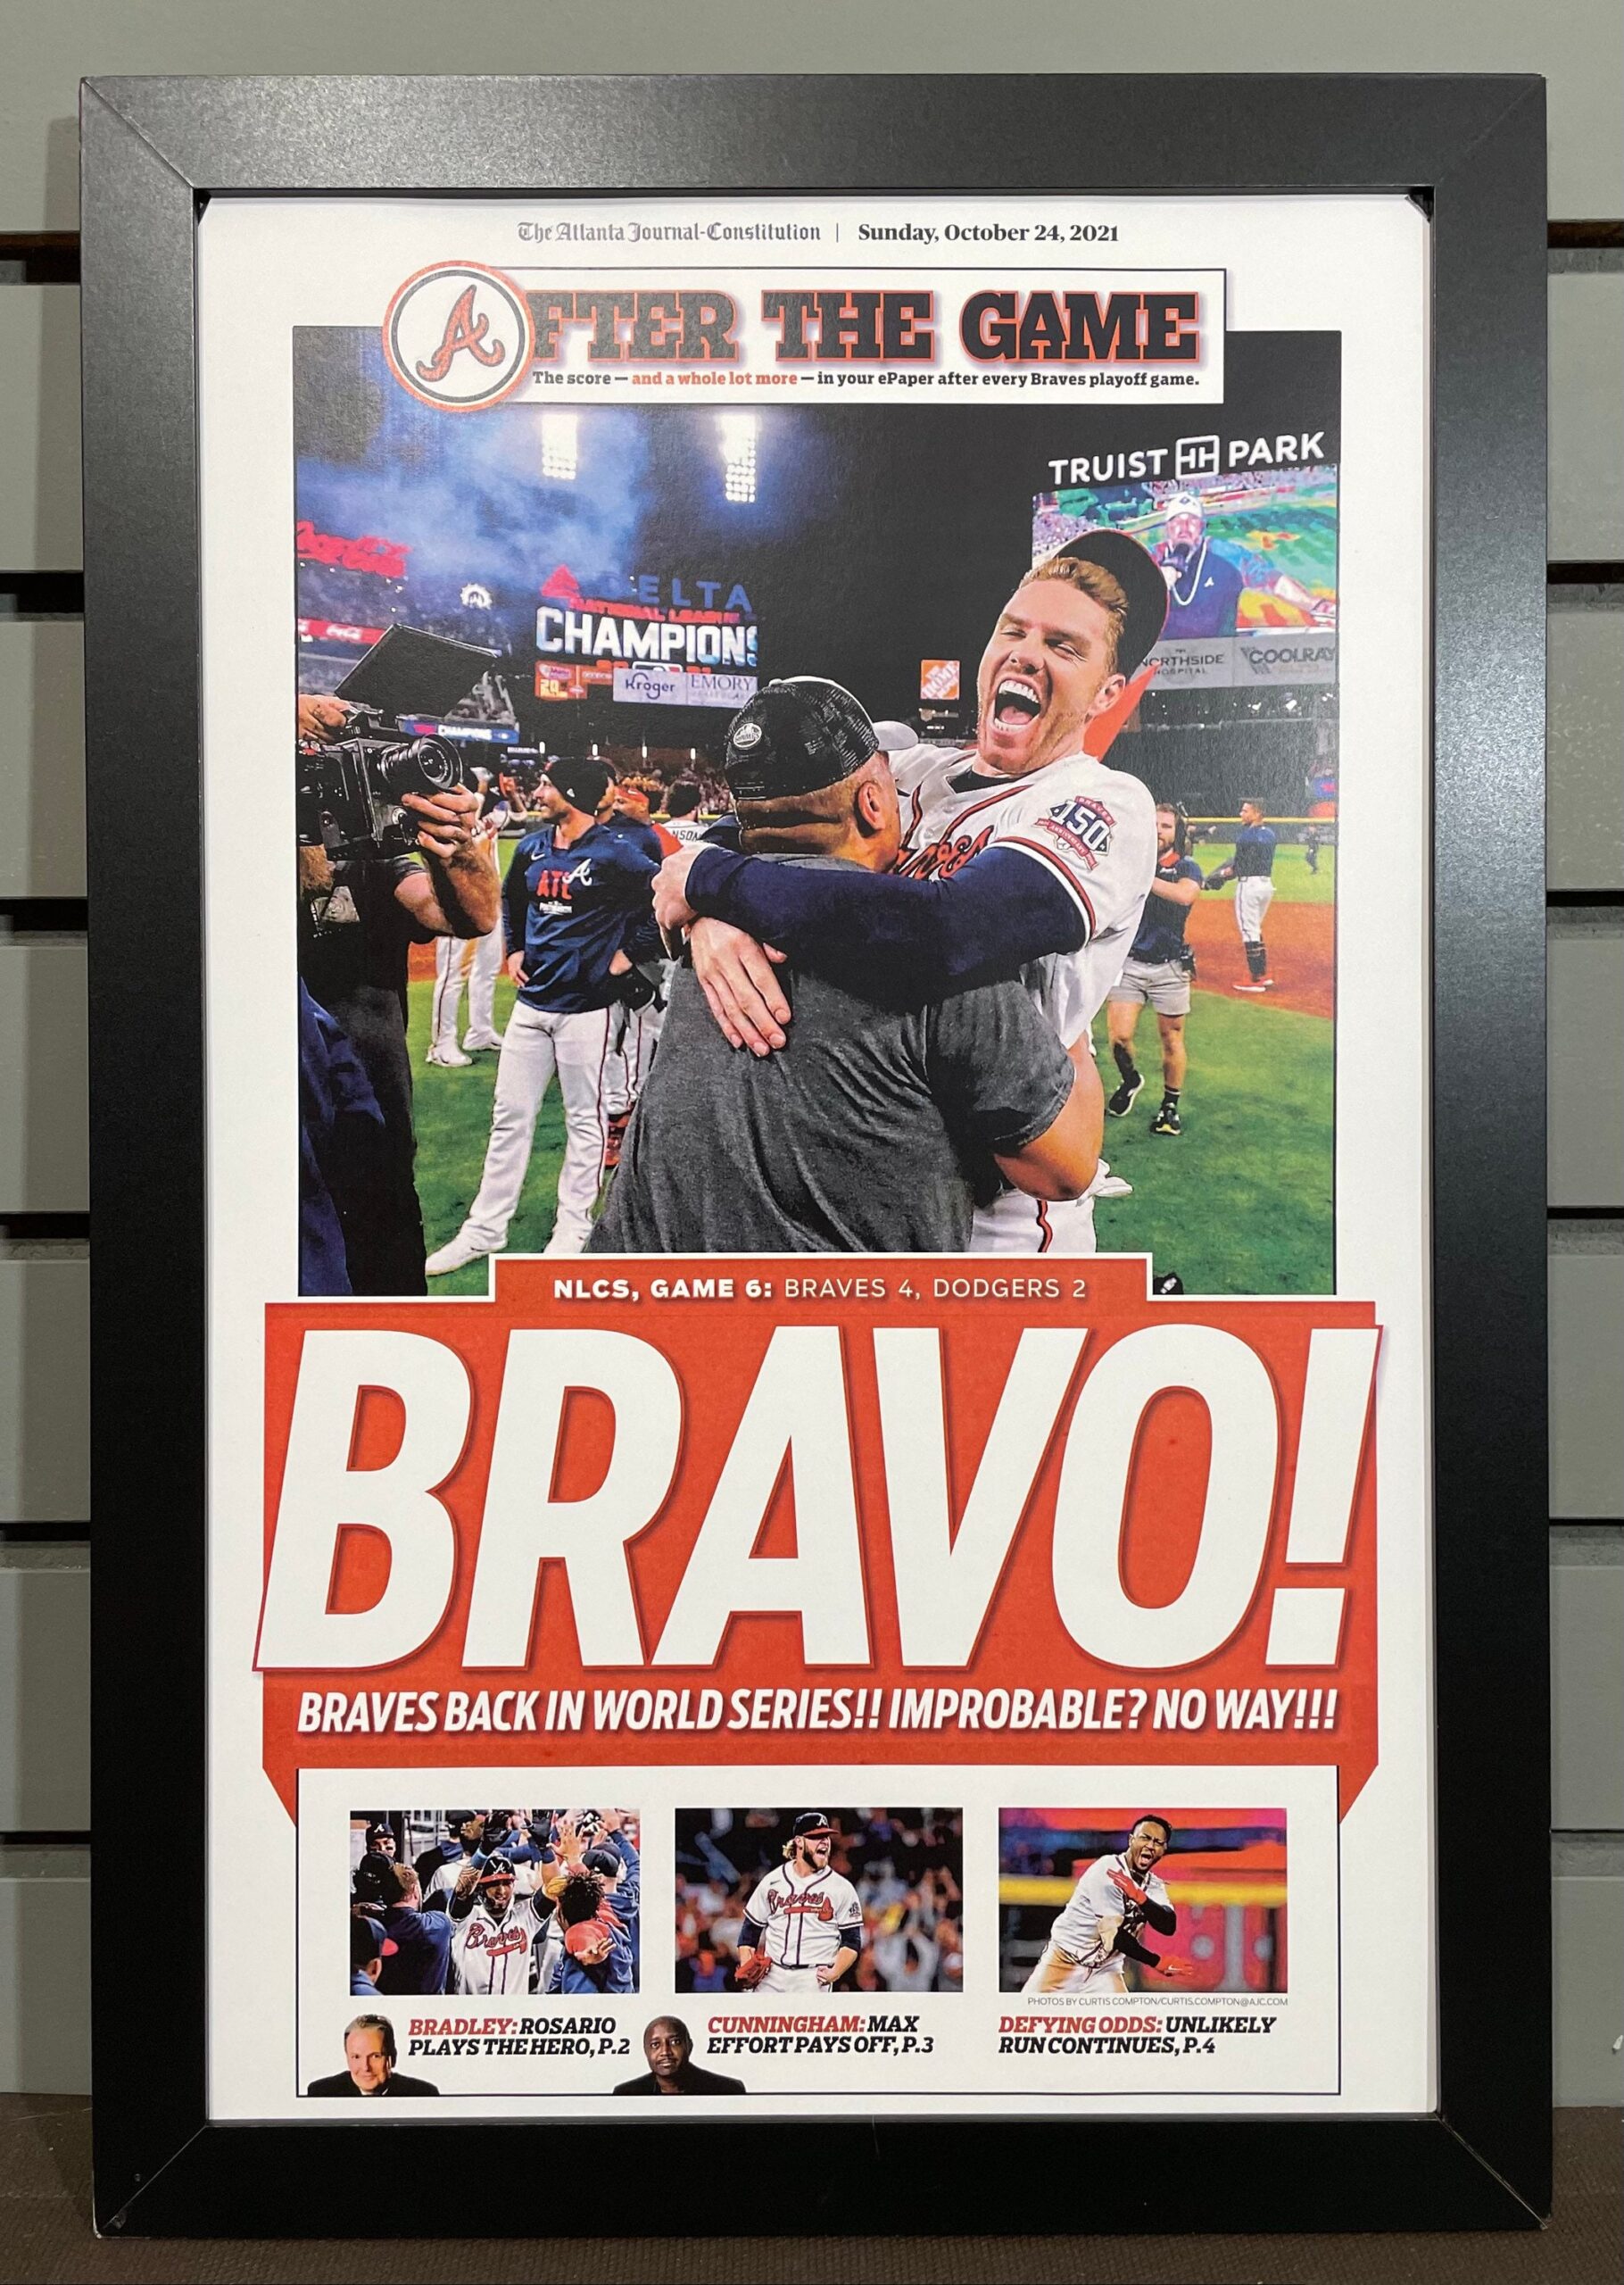 Atlanta Braves headed to World Series, get your NLCS merchandise